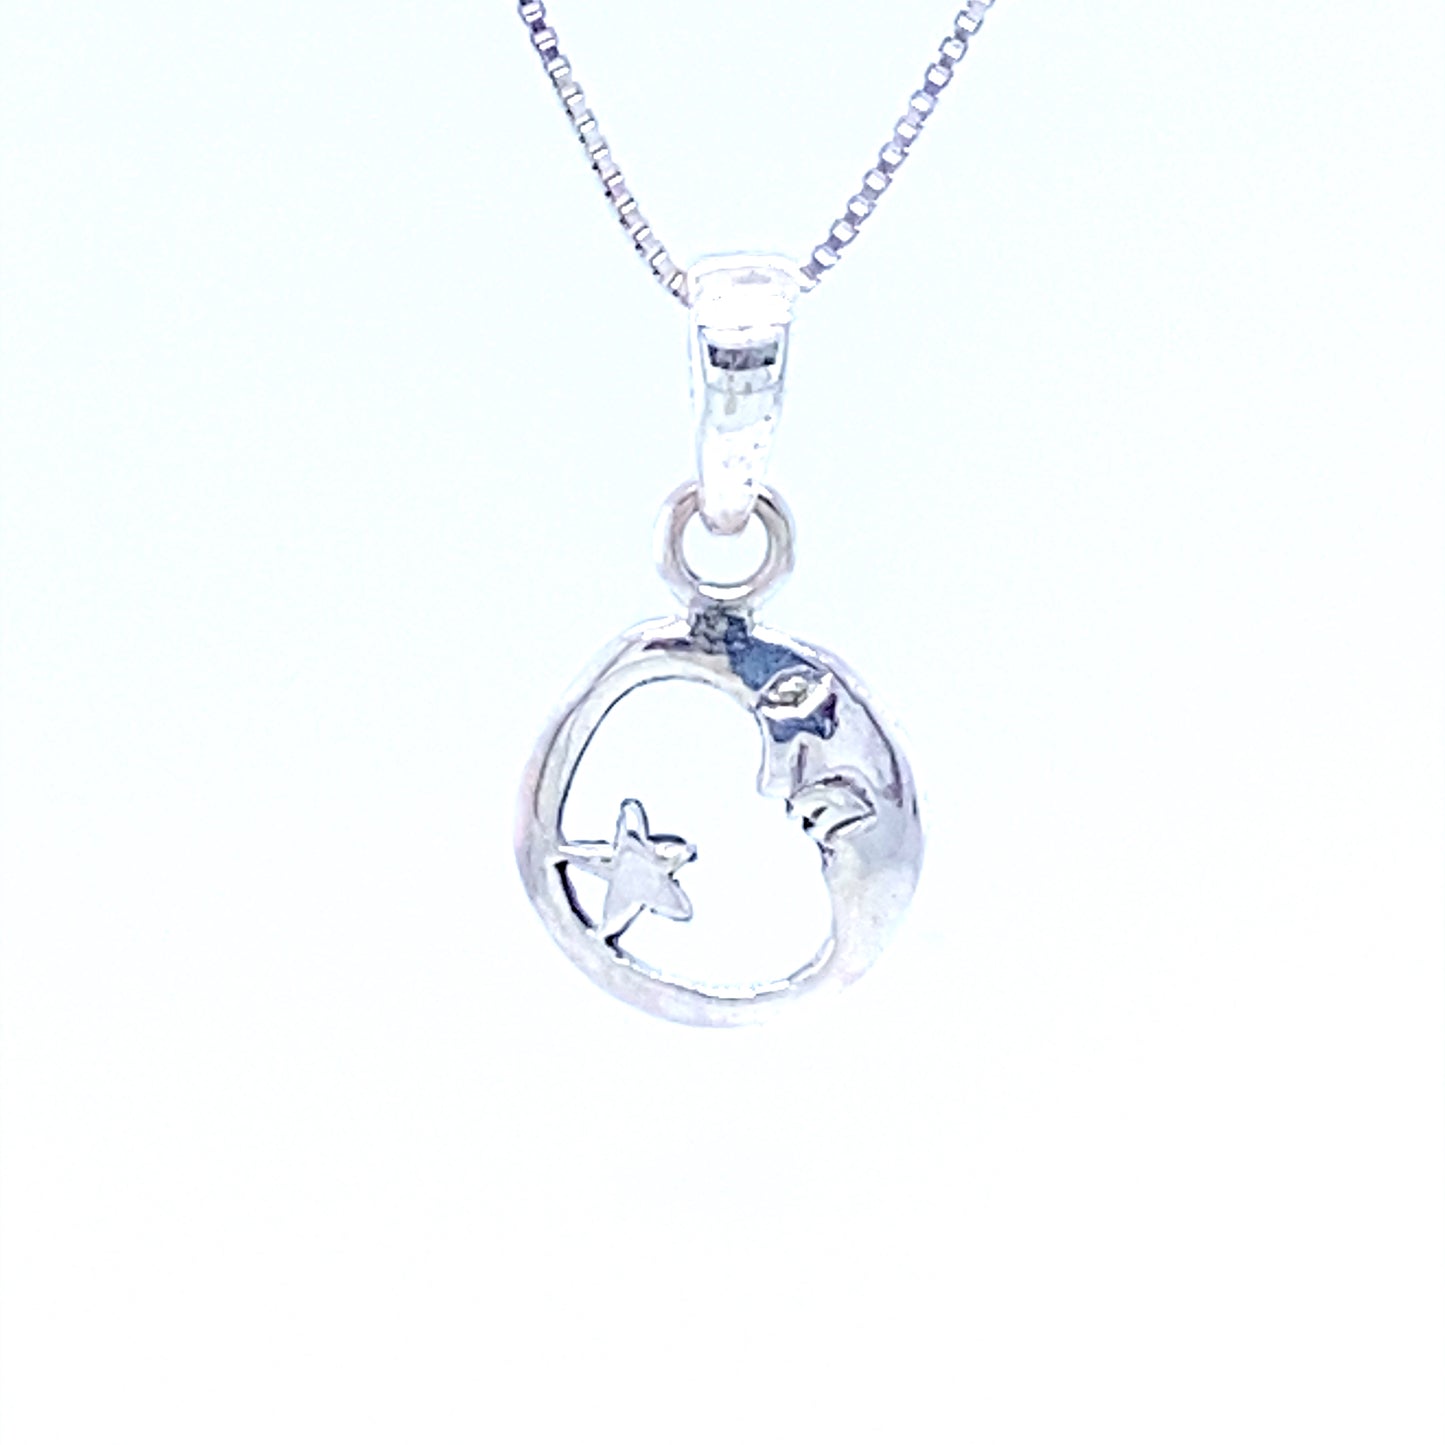 A Small Moon and Star Pendant from Super Silver with a sky-lover vibe.